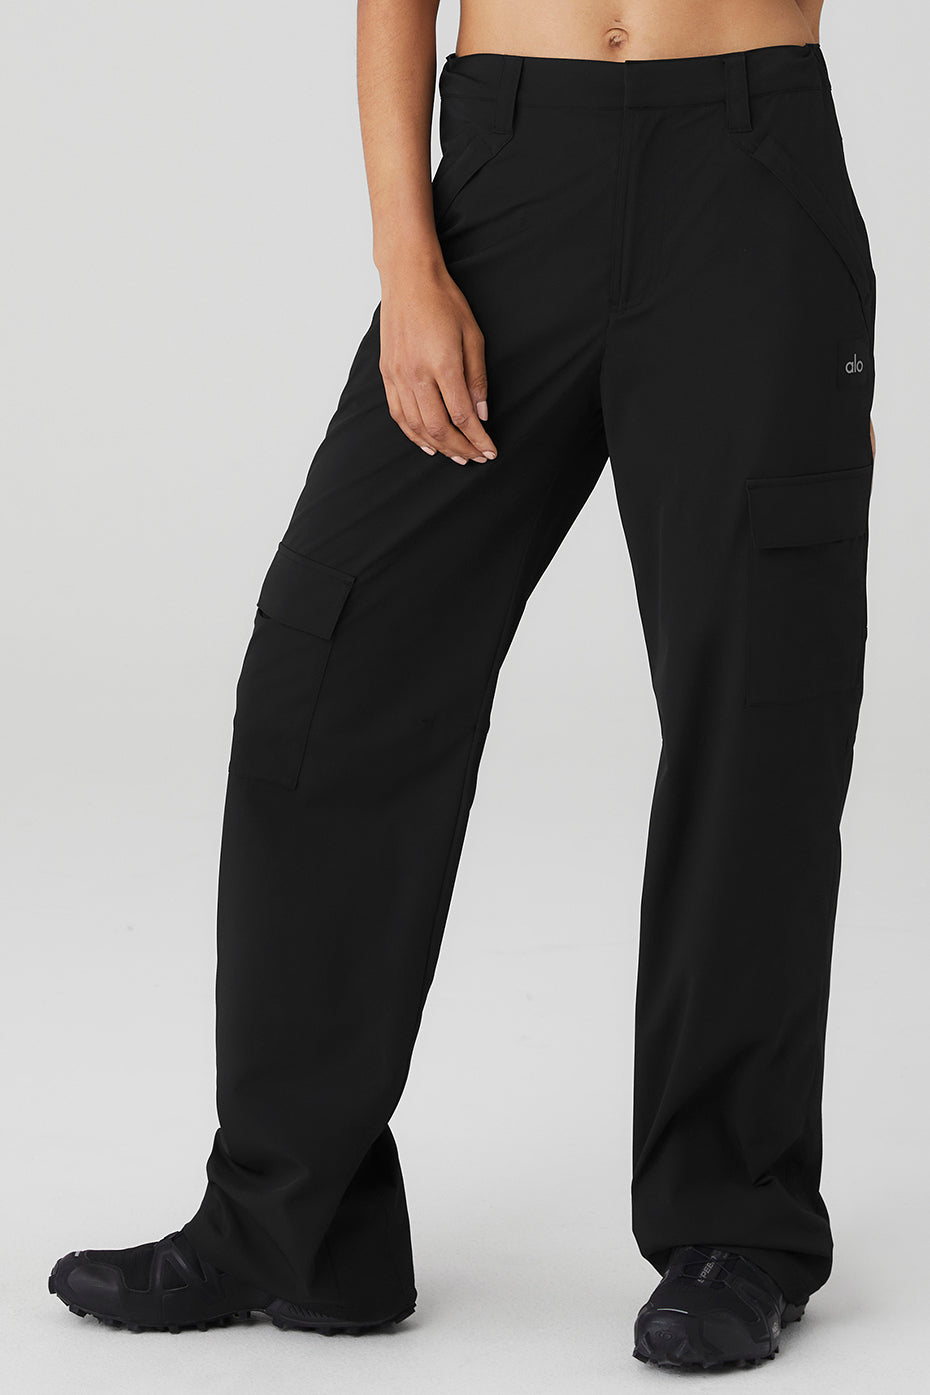 ALO YOGA STRETCH JERSEY CARGO PANTS SMALL